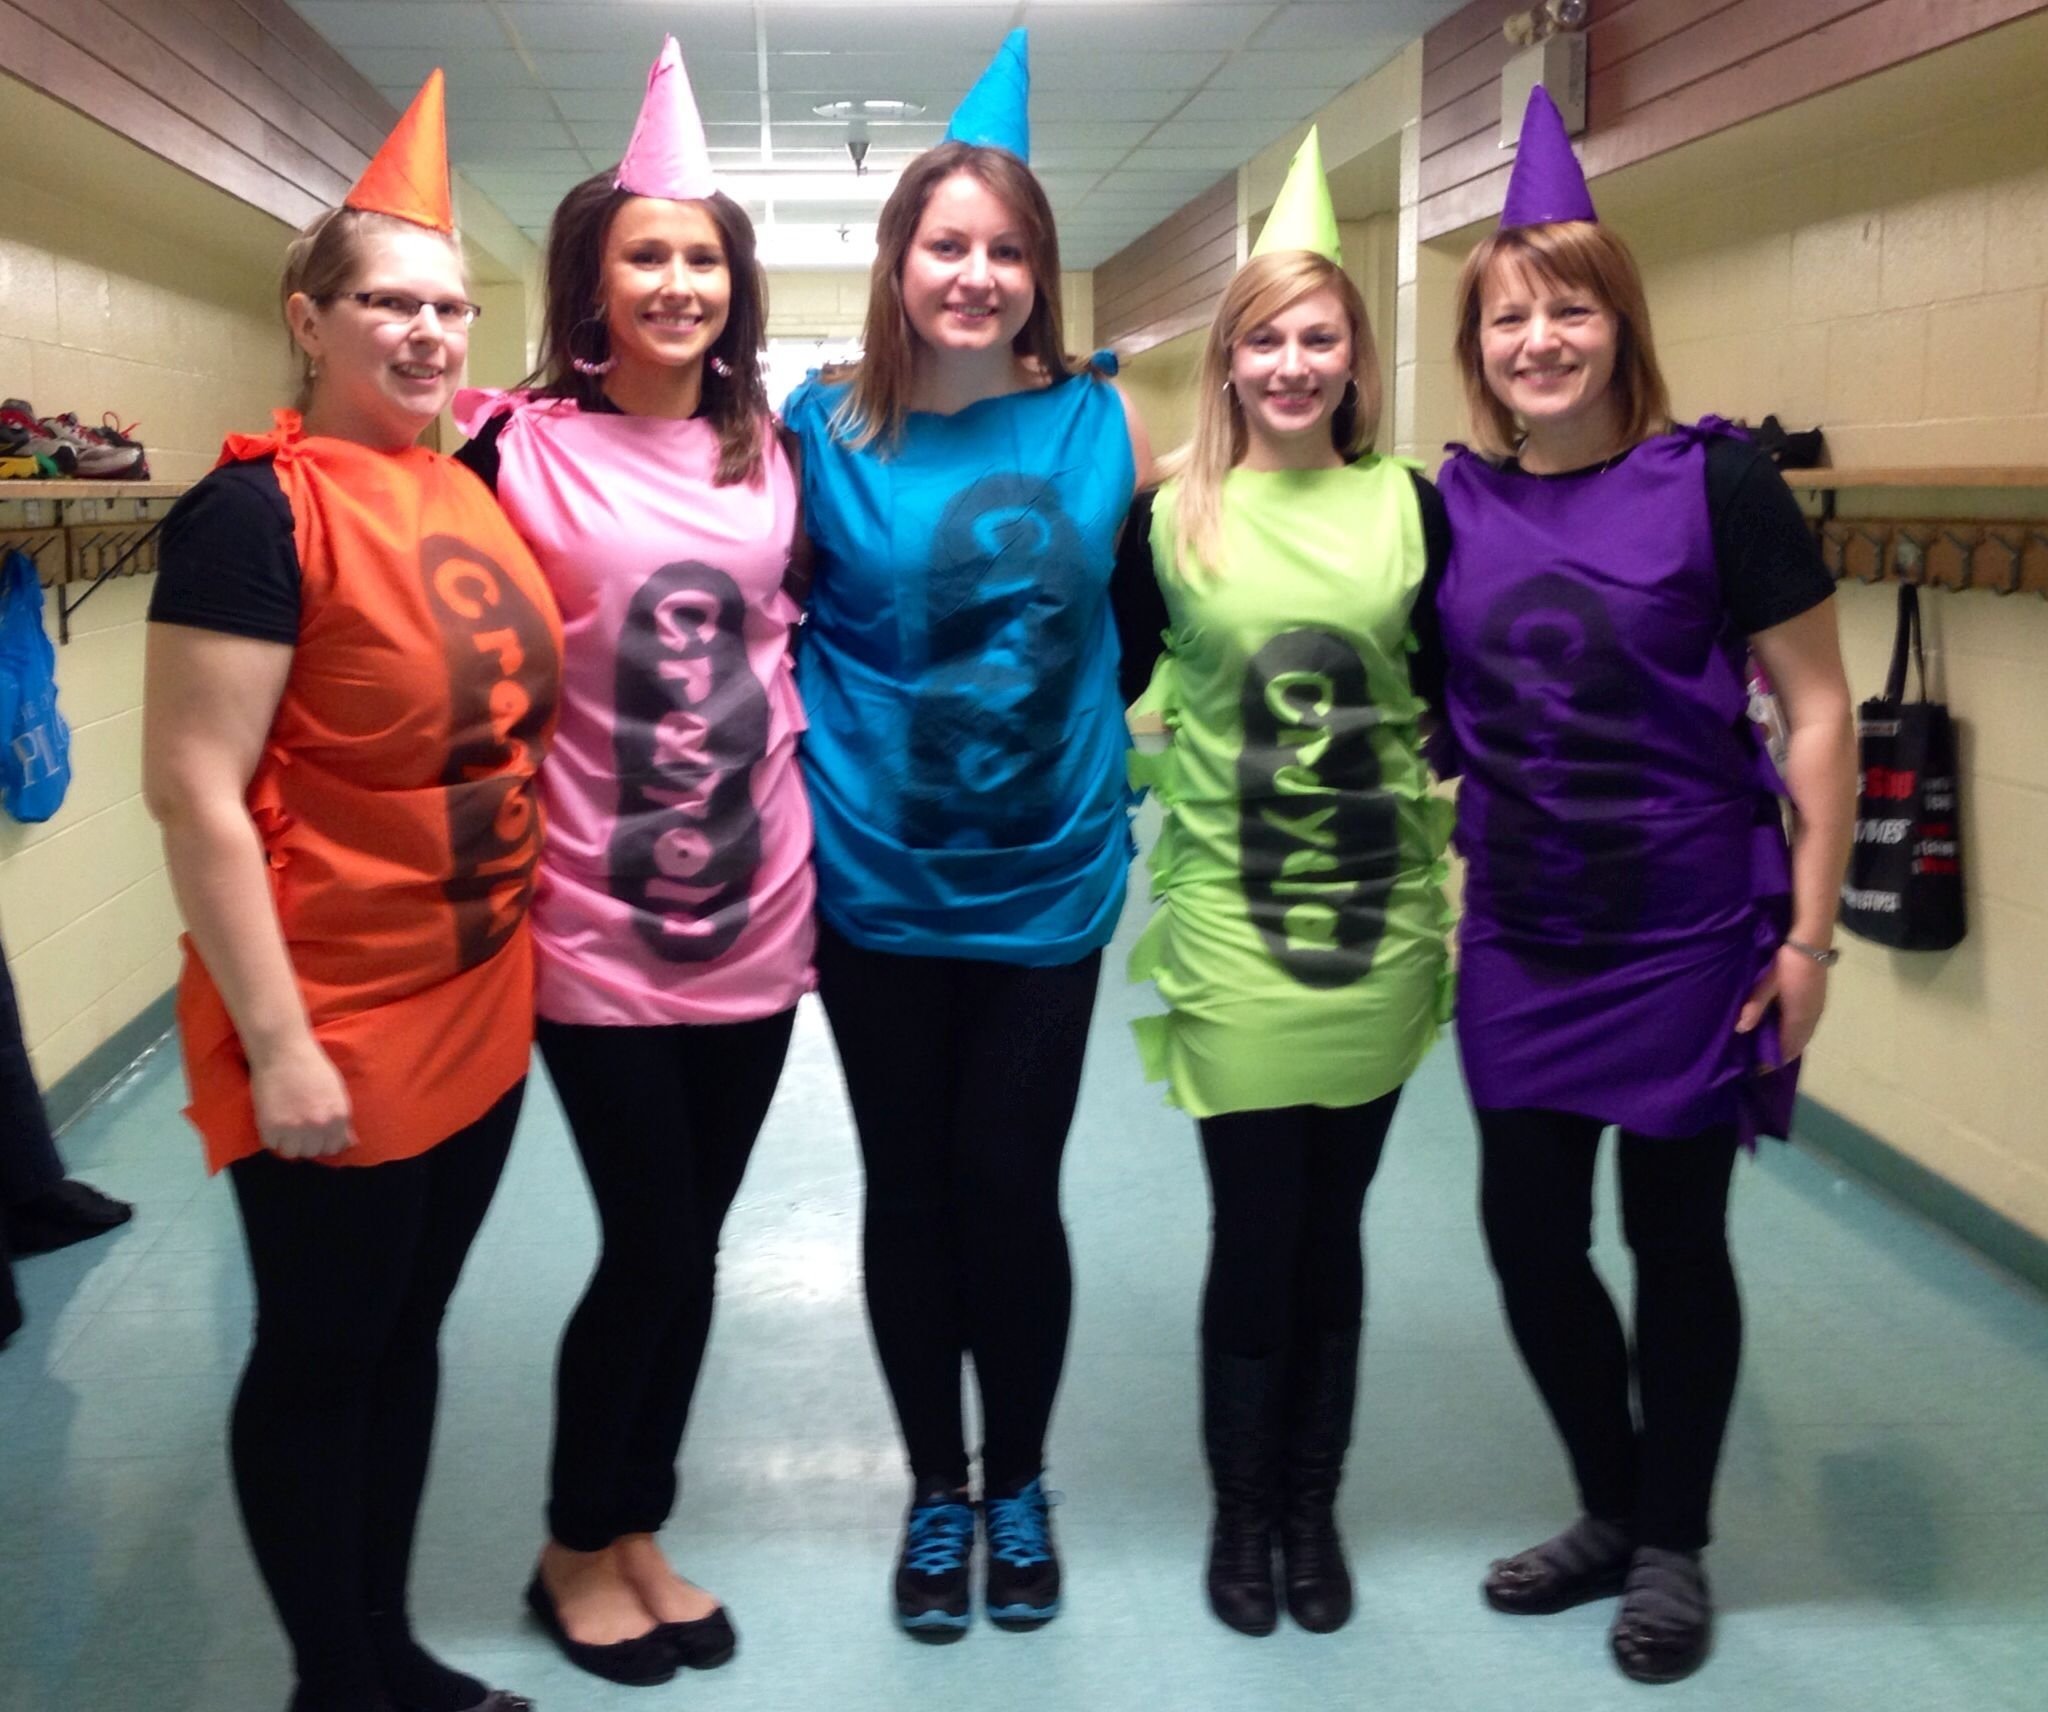 10 Stylish Cute Group Halloween Costume Ideas cute group costumes elementary teachers dressed as crayons 2022